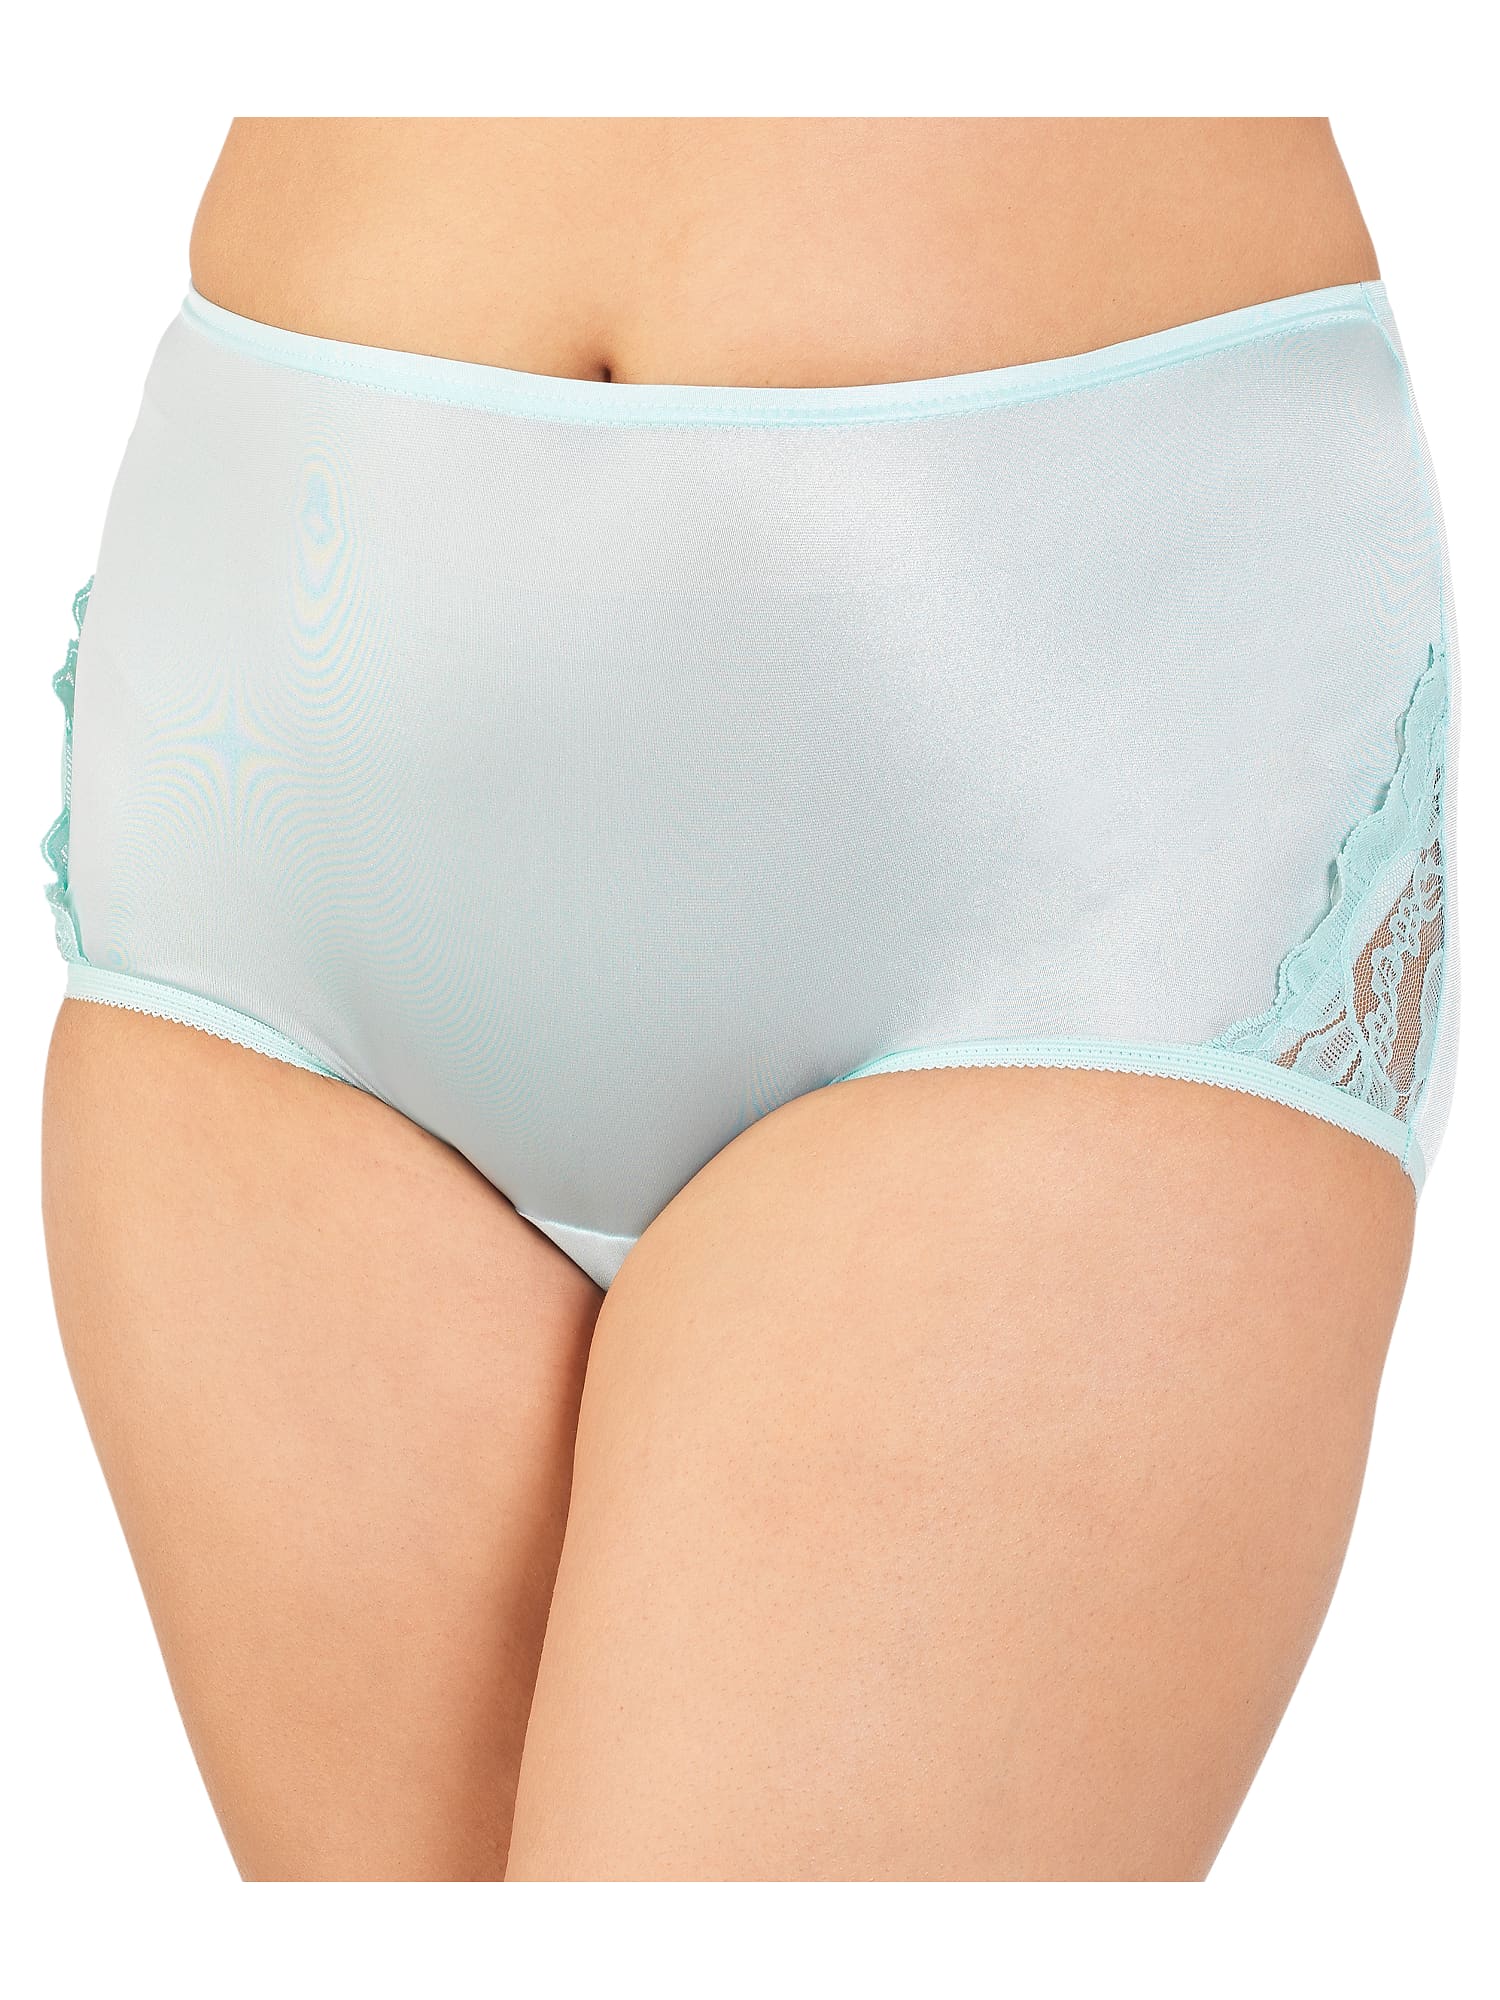 Vanity Fair Brief 7 L Perfectly Yours Nylon Nouveau Lace 13001 Panty Blue  Yellow for sale online